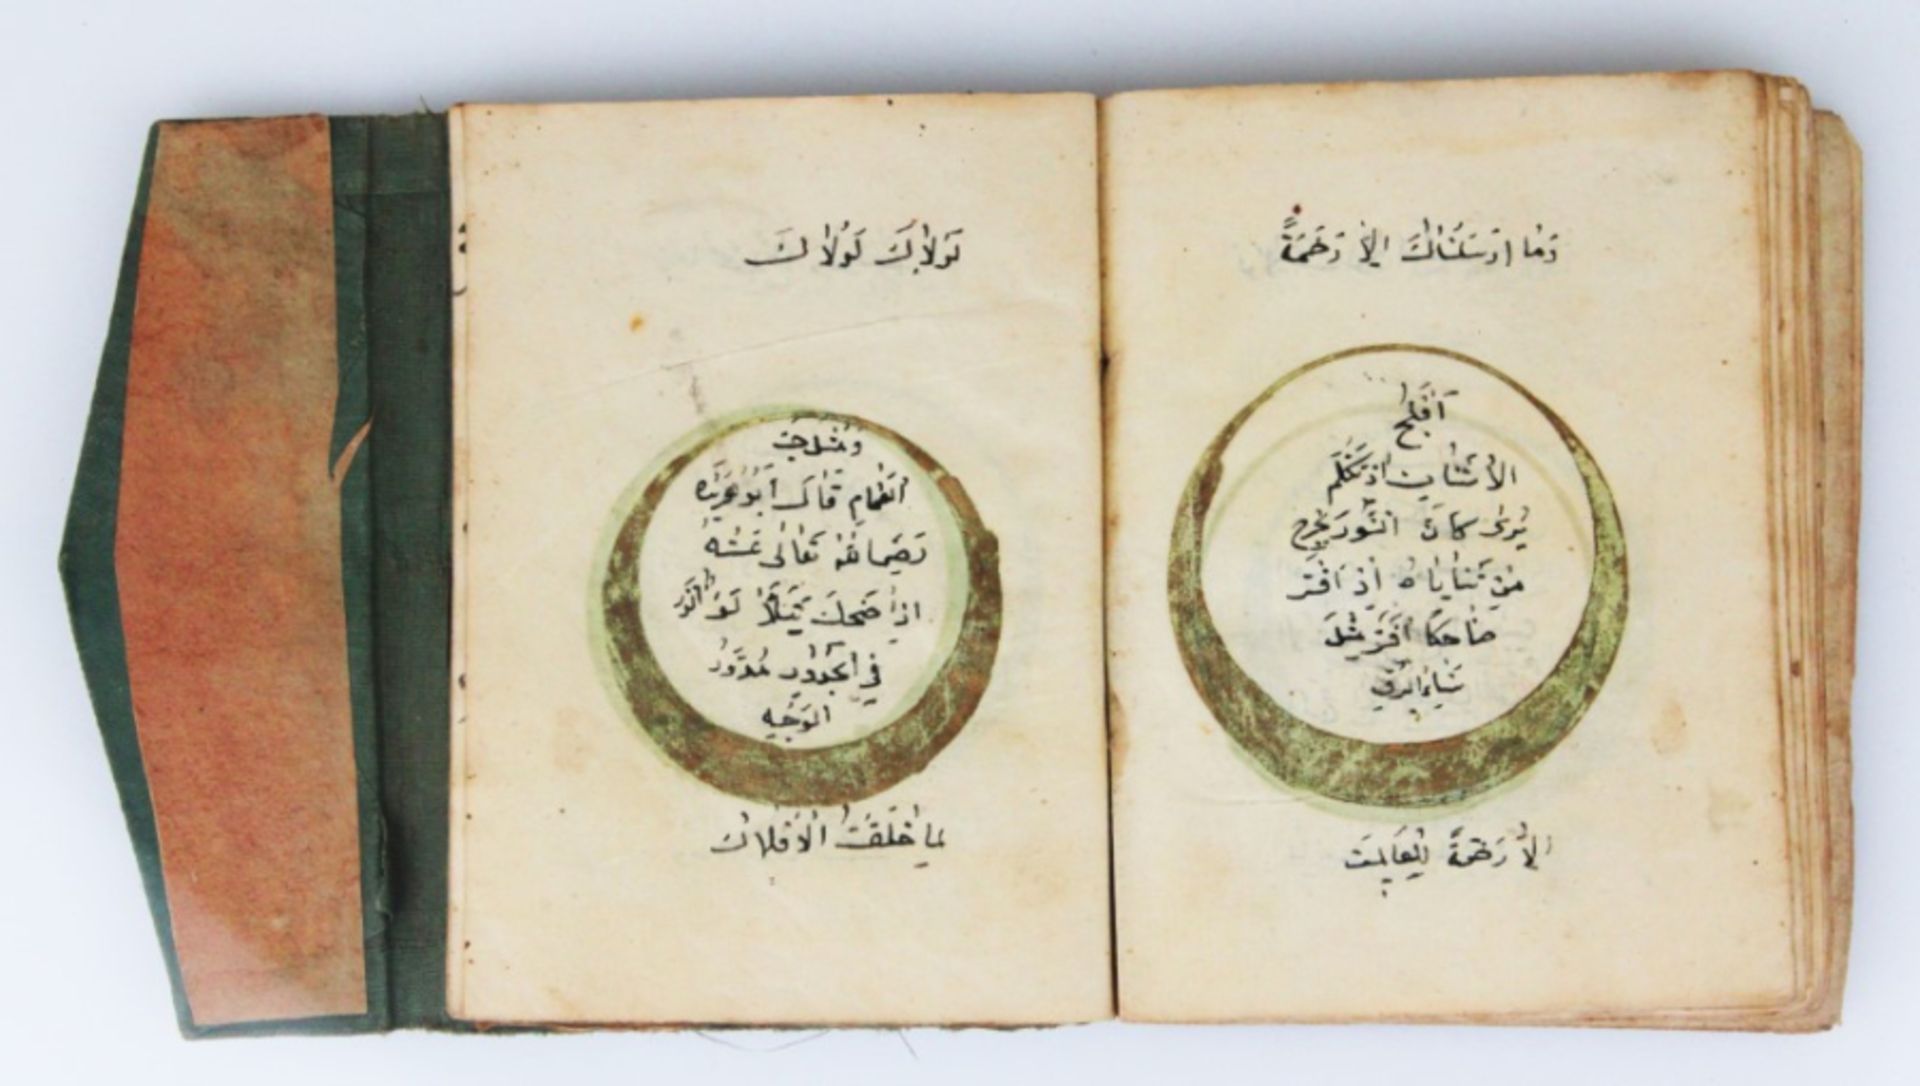 A 18th century Ottoman book with suras and prayers